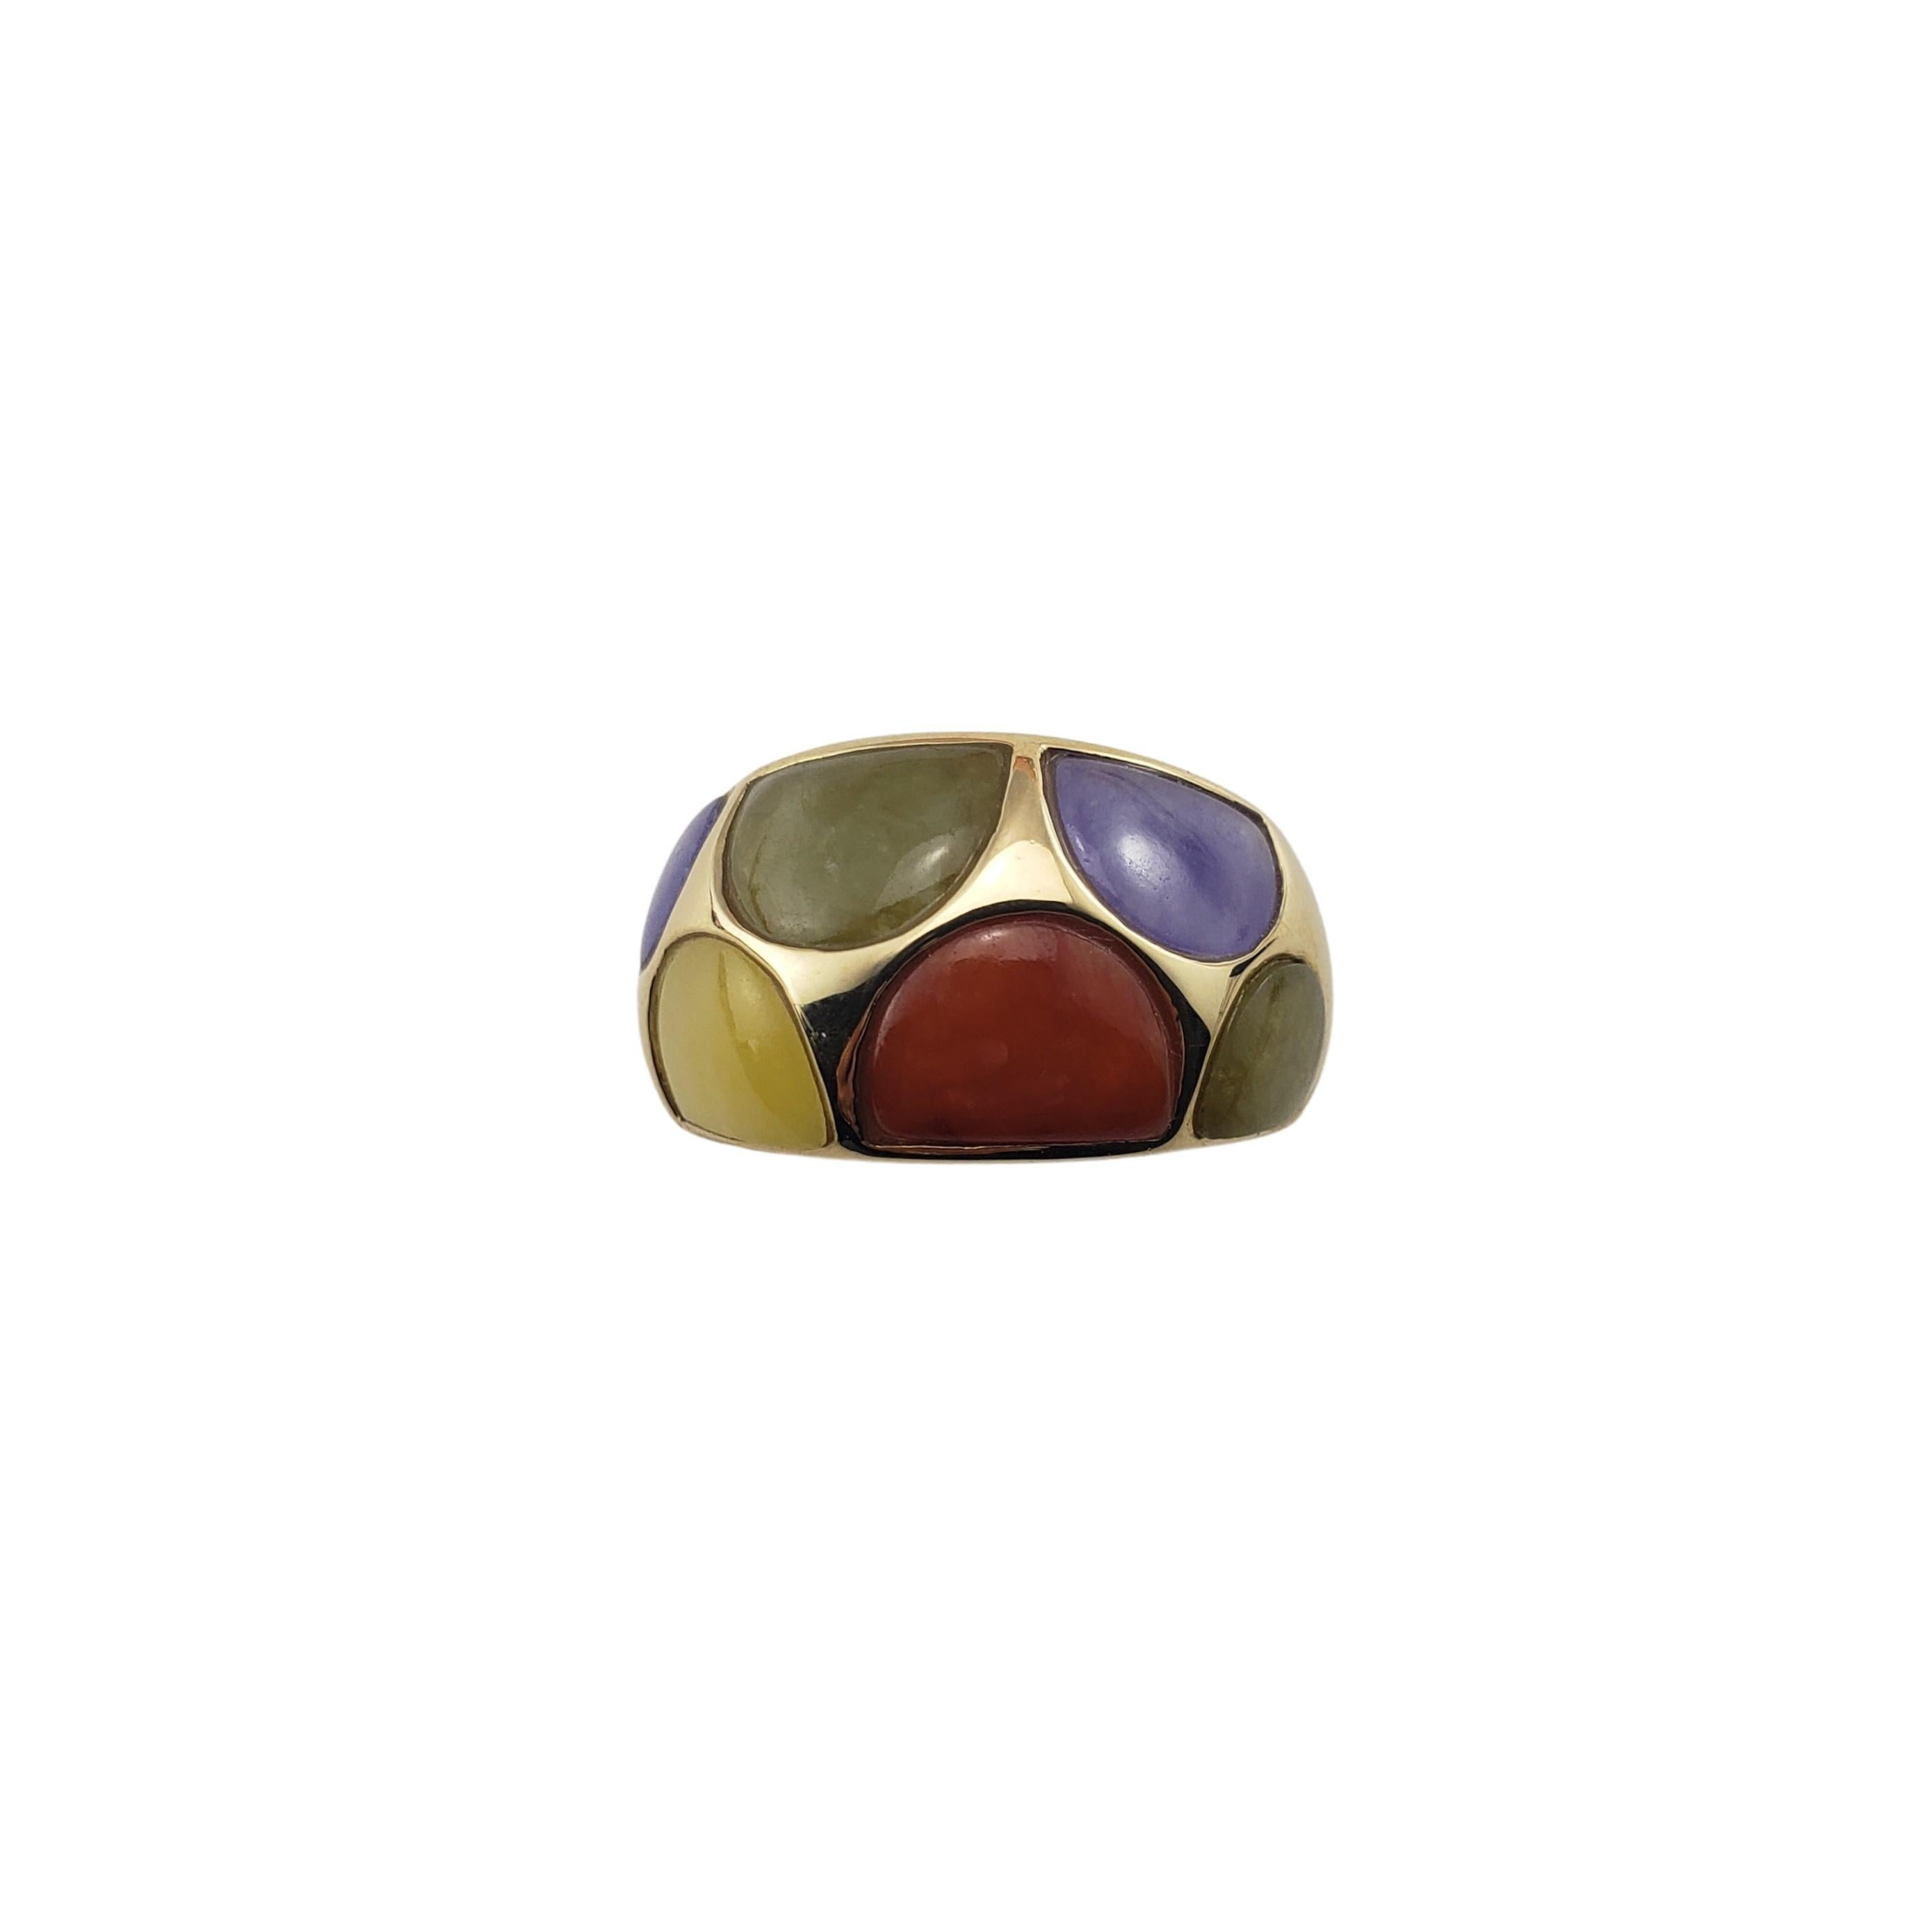 14 Karat Yellow Gold and Jade Ring Size 7.25-

This stunning band features multi-colored jade stoned set in elegant 14K yellow gold.  Width:  13 mm.  Shank:  3 mm.

Ring Size: 7.25

Weight:  3.8 dwt. /  6.0 gr.

Stamped: 14K  CHINA

Very good